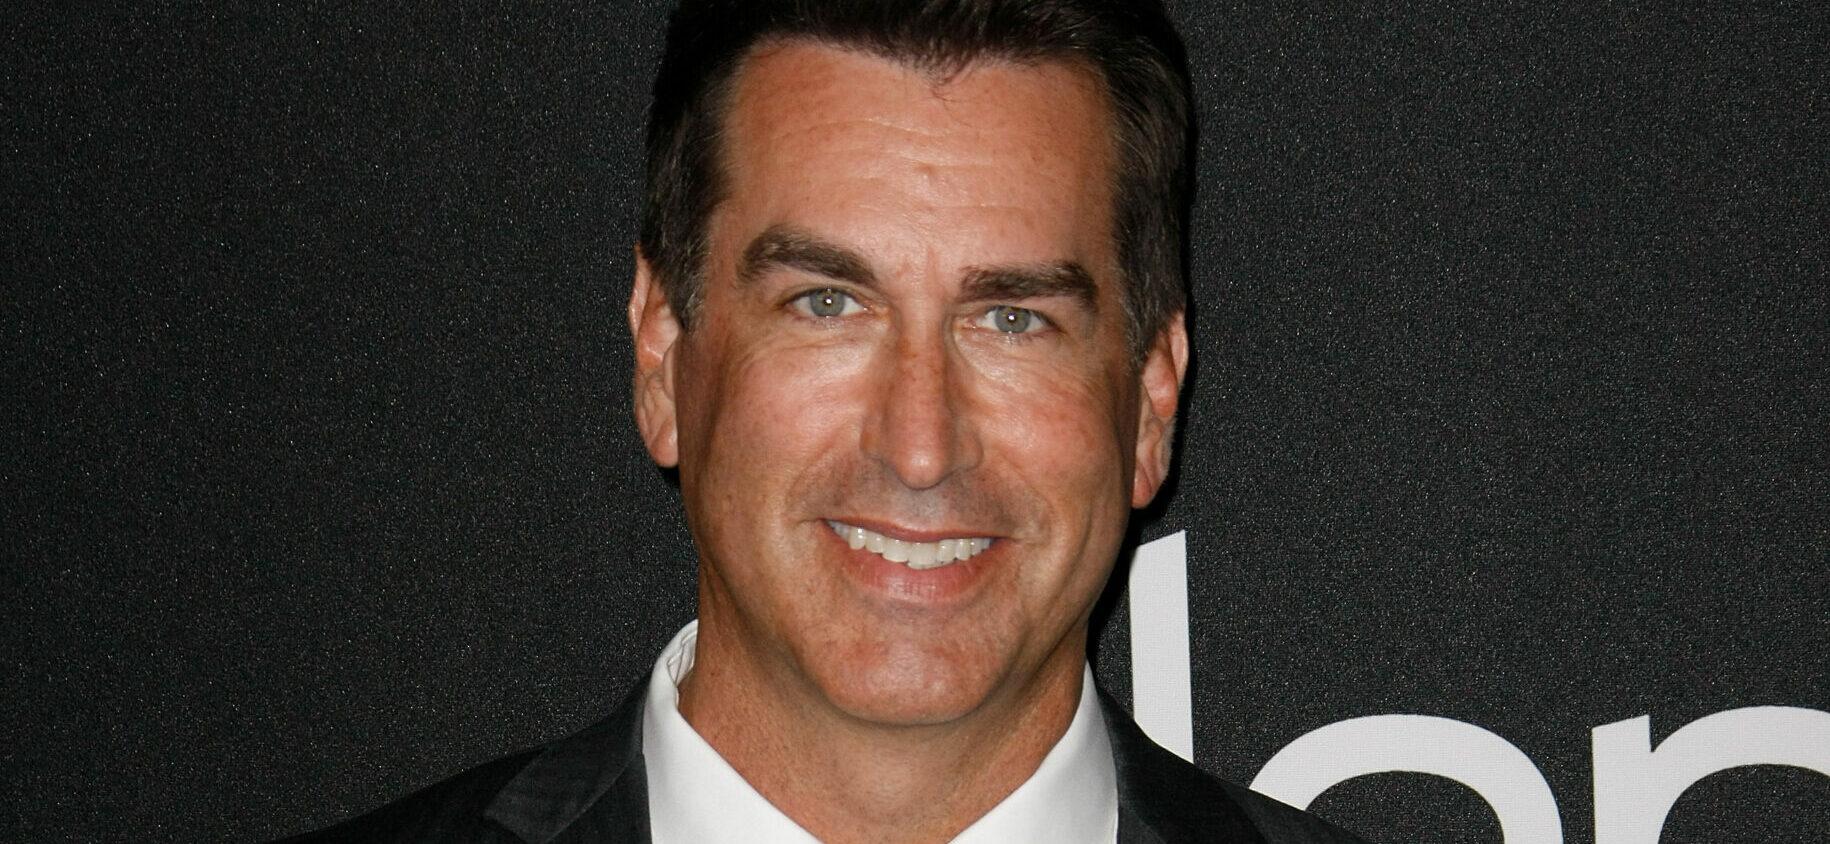 Rob Riggle Caught Secretly Dating Former ‘Holey Moley’ Contestant